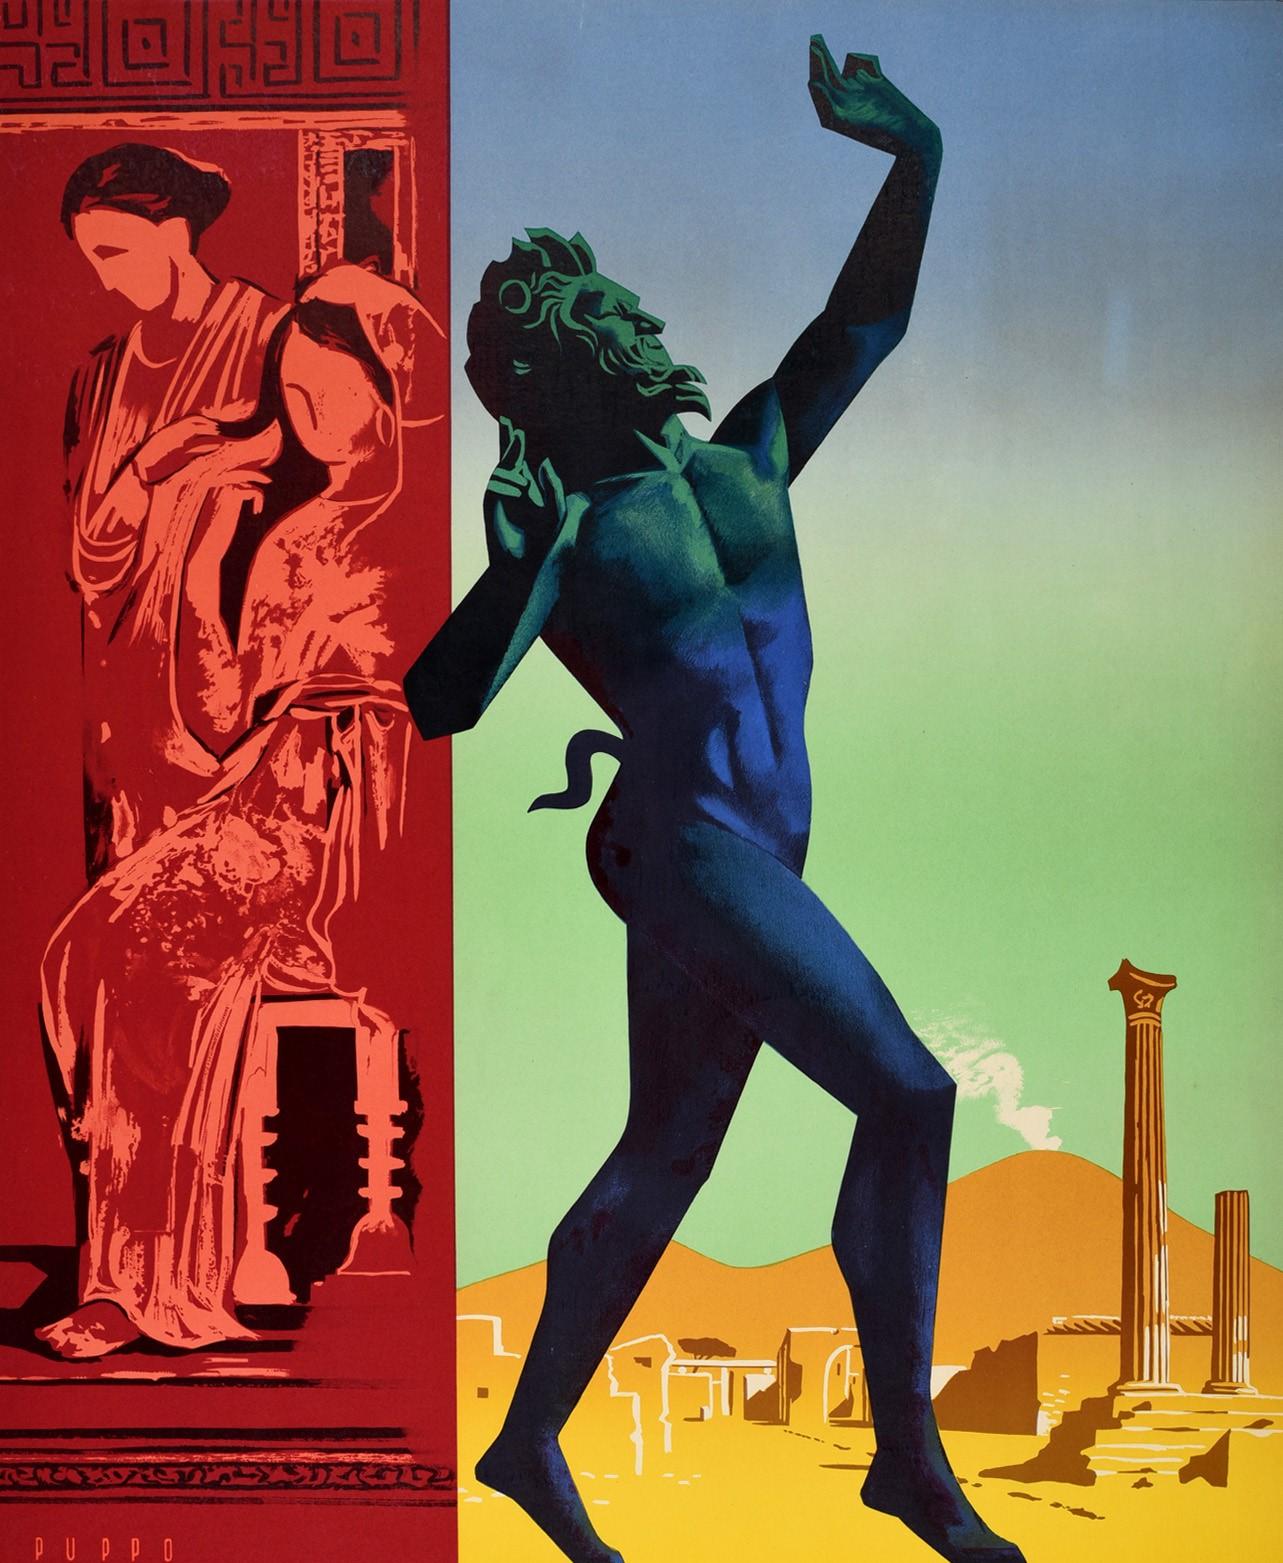 Original vintage travel poster for Pompei / Pompeii Italy featuring colourful artwork by the Italian graphic artist Mario Puppo (1913-1989) depicting the ancient horned Roman god statue preserved in the ash from the volcano in the House of the Faun